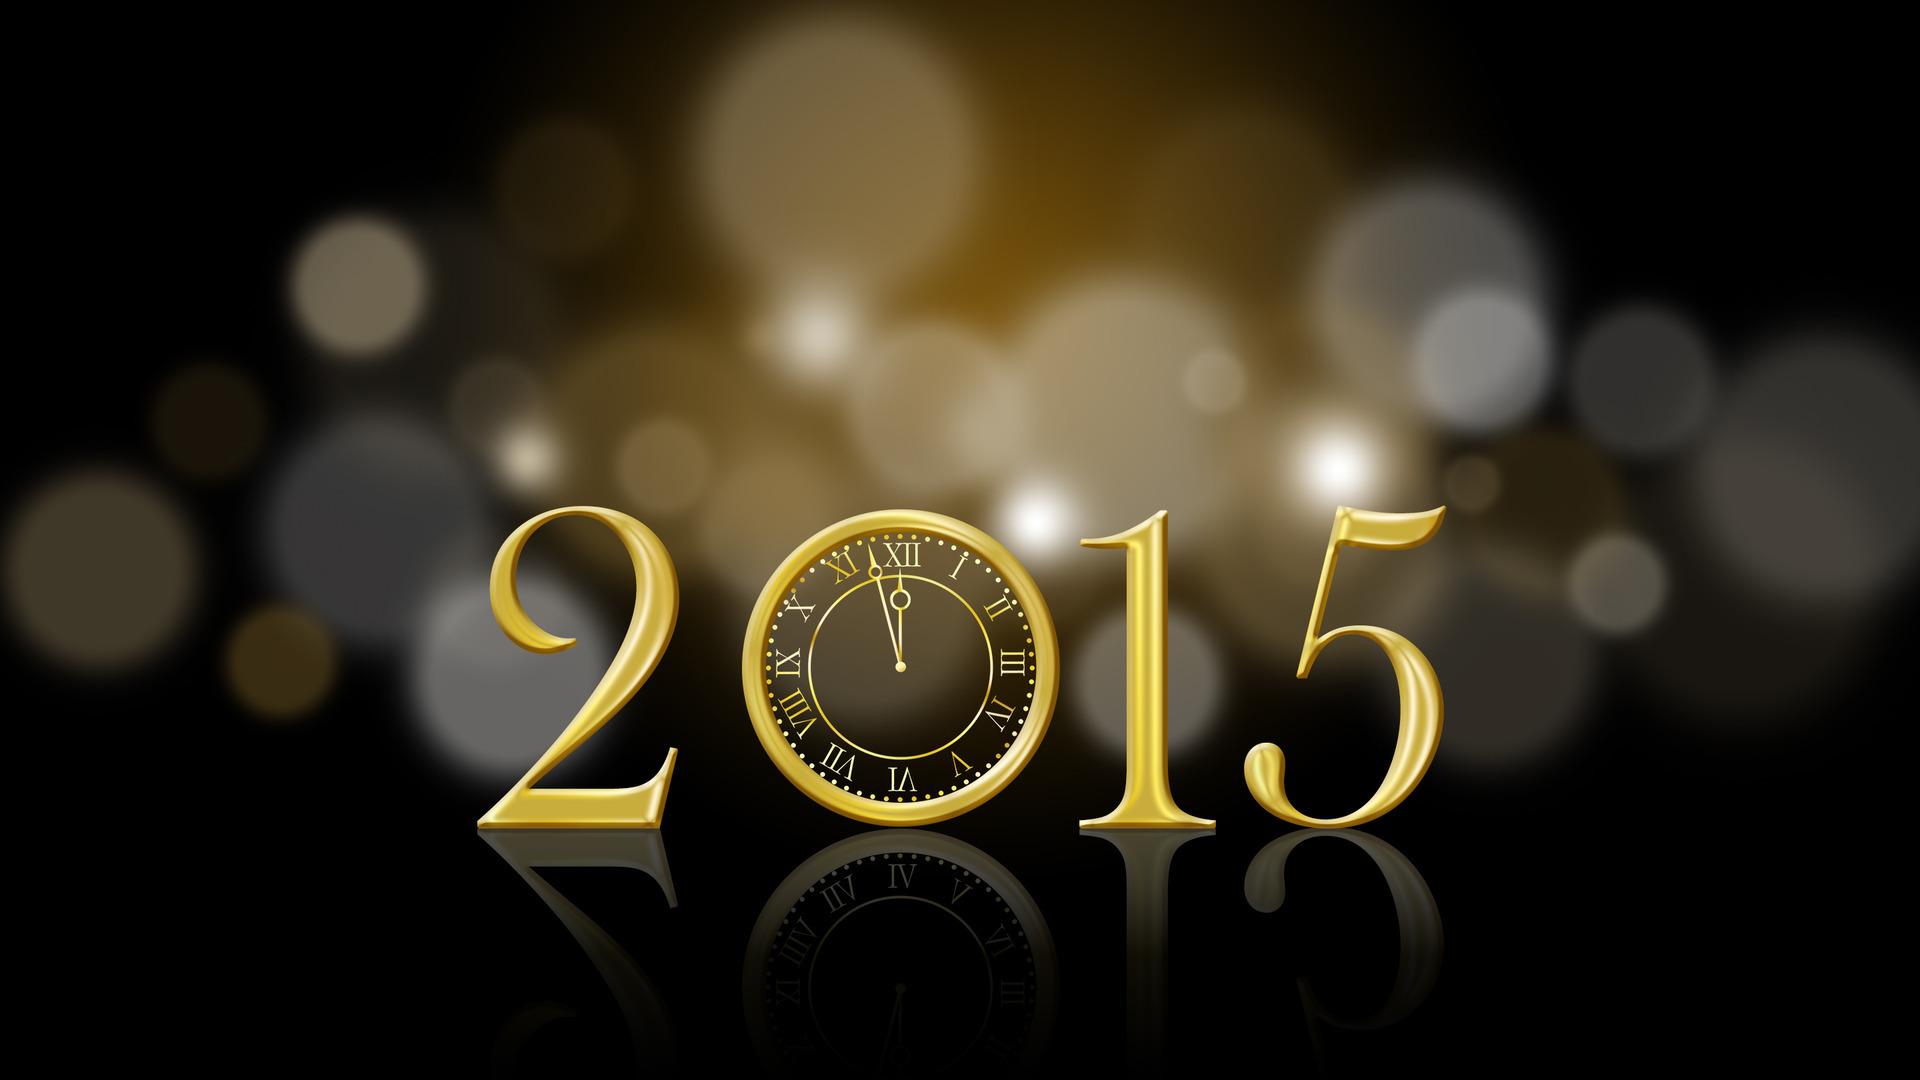 Happy New Year 2015 HD 3D Animated Images Free Download